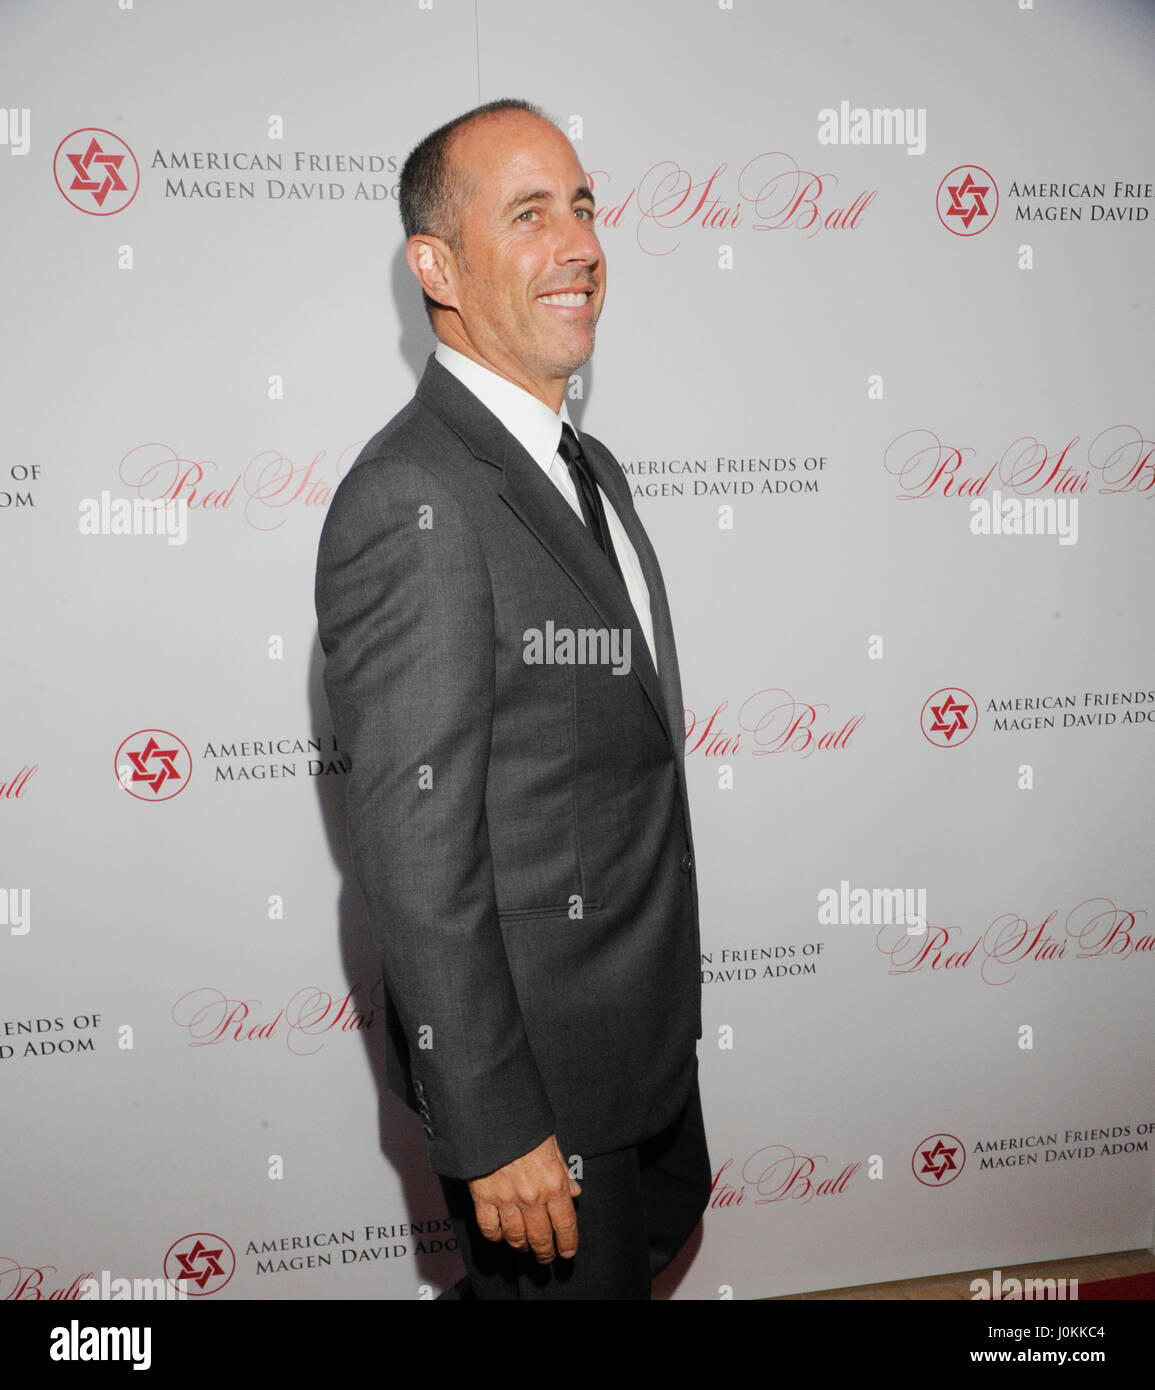 Comedian Jerry Seinfeld arrives at the American Friends of Magen David Adom (AFMDA) host 3rd Annual Red Star Ball at the Beverly Hills Hilton on October 22nd, 2015 in Los Angeles, California. Stock Photo